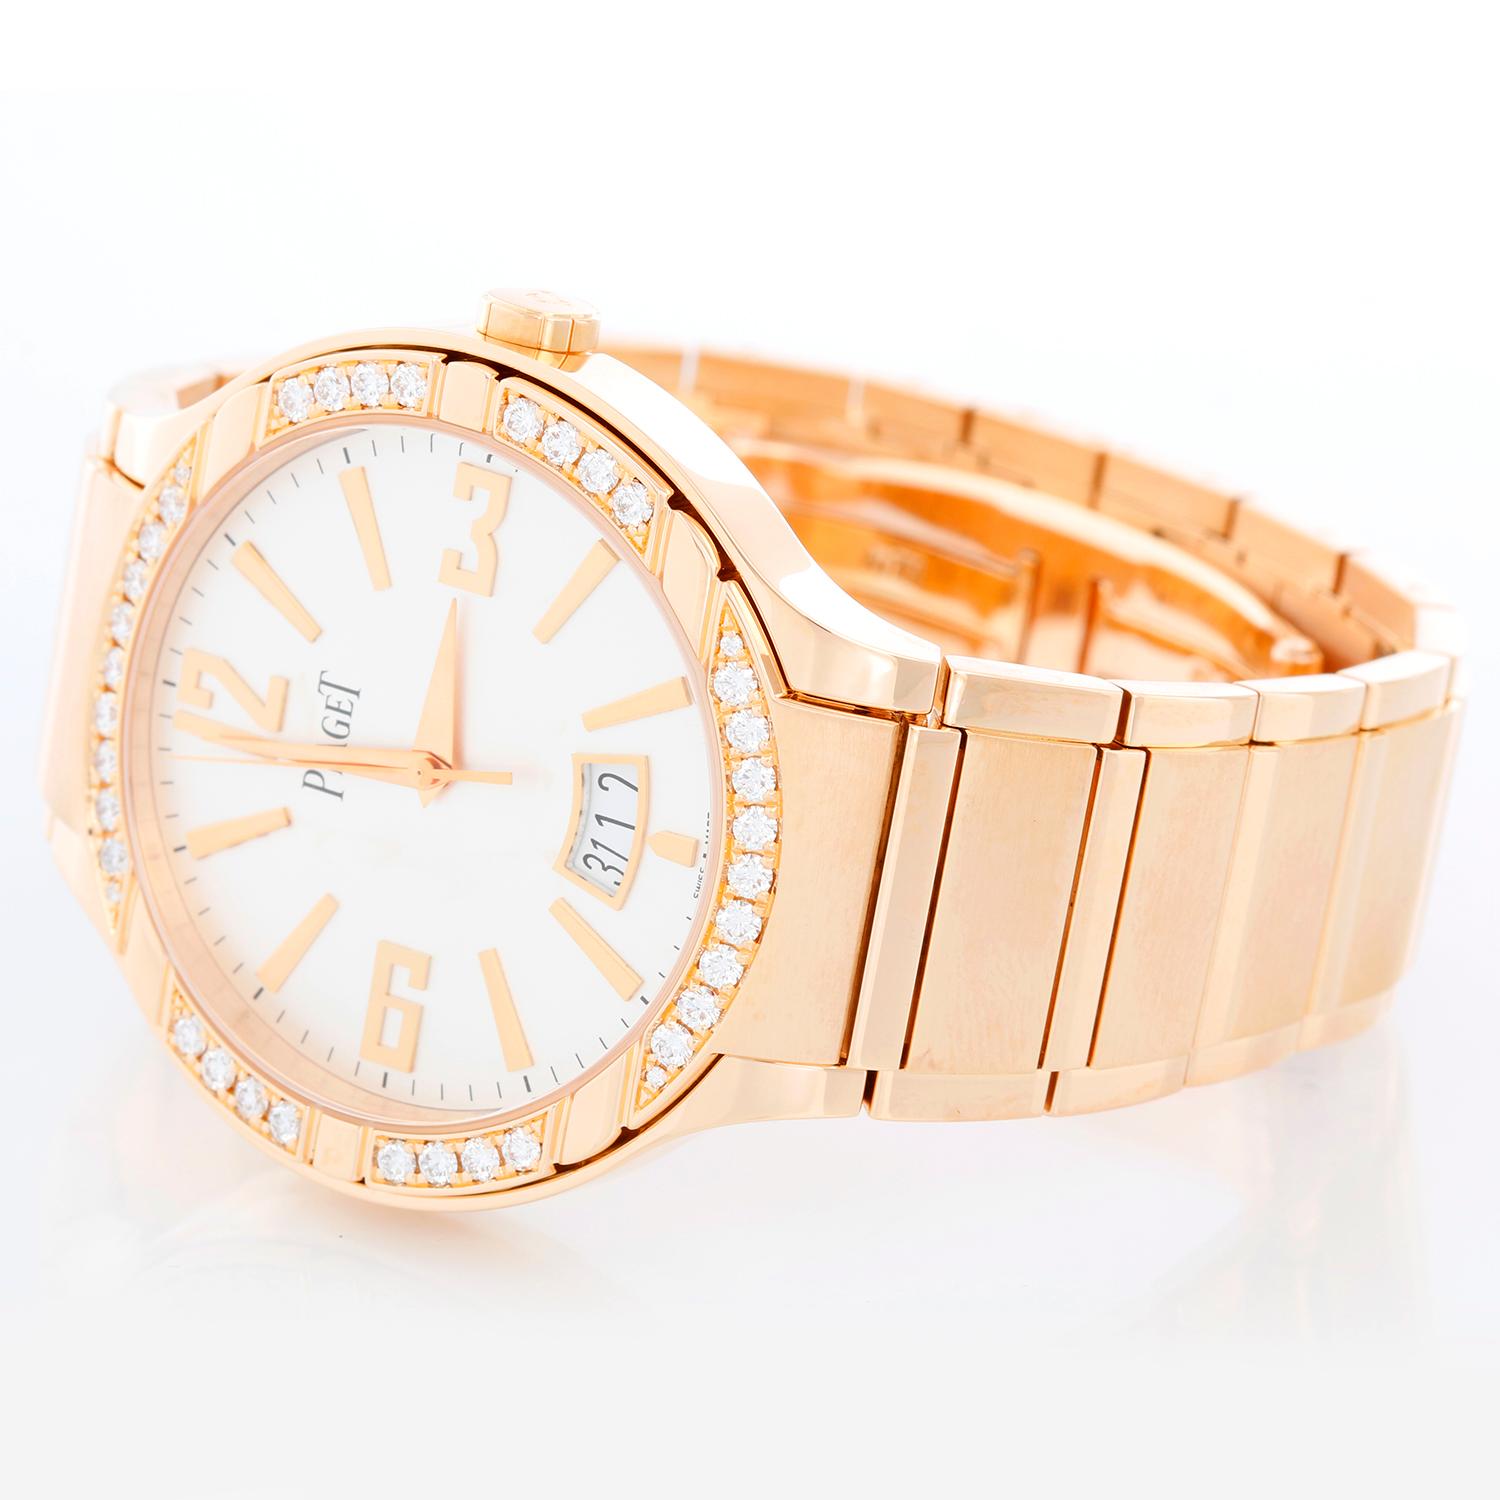 Piaget Polo 18k Rose Gold Diamond Watch Silver Dial G0A36023 - Automatic winding. 18k rose gold case (40mm diameter) with diamonds; 38 brilliant-cut diamonds approx. 1.1 cts. Silver dial with gold Arabic numerals and stick markers; date at 6